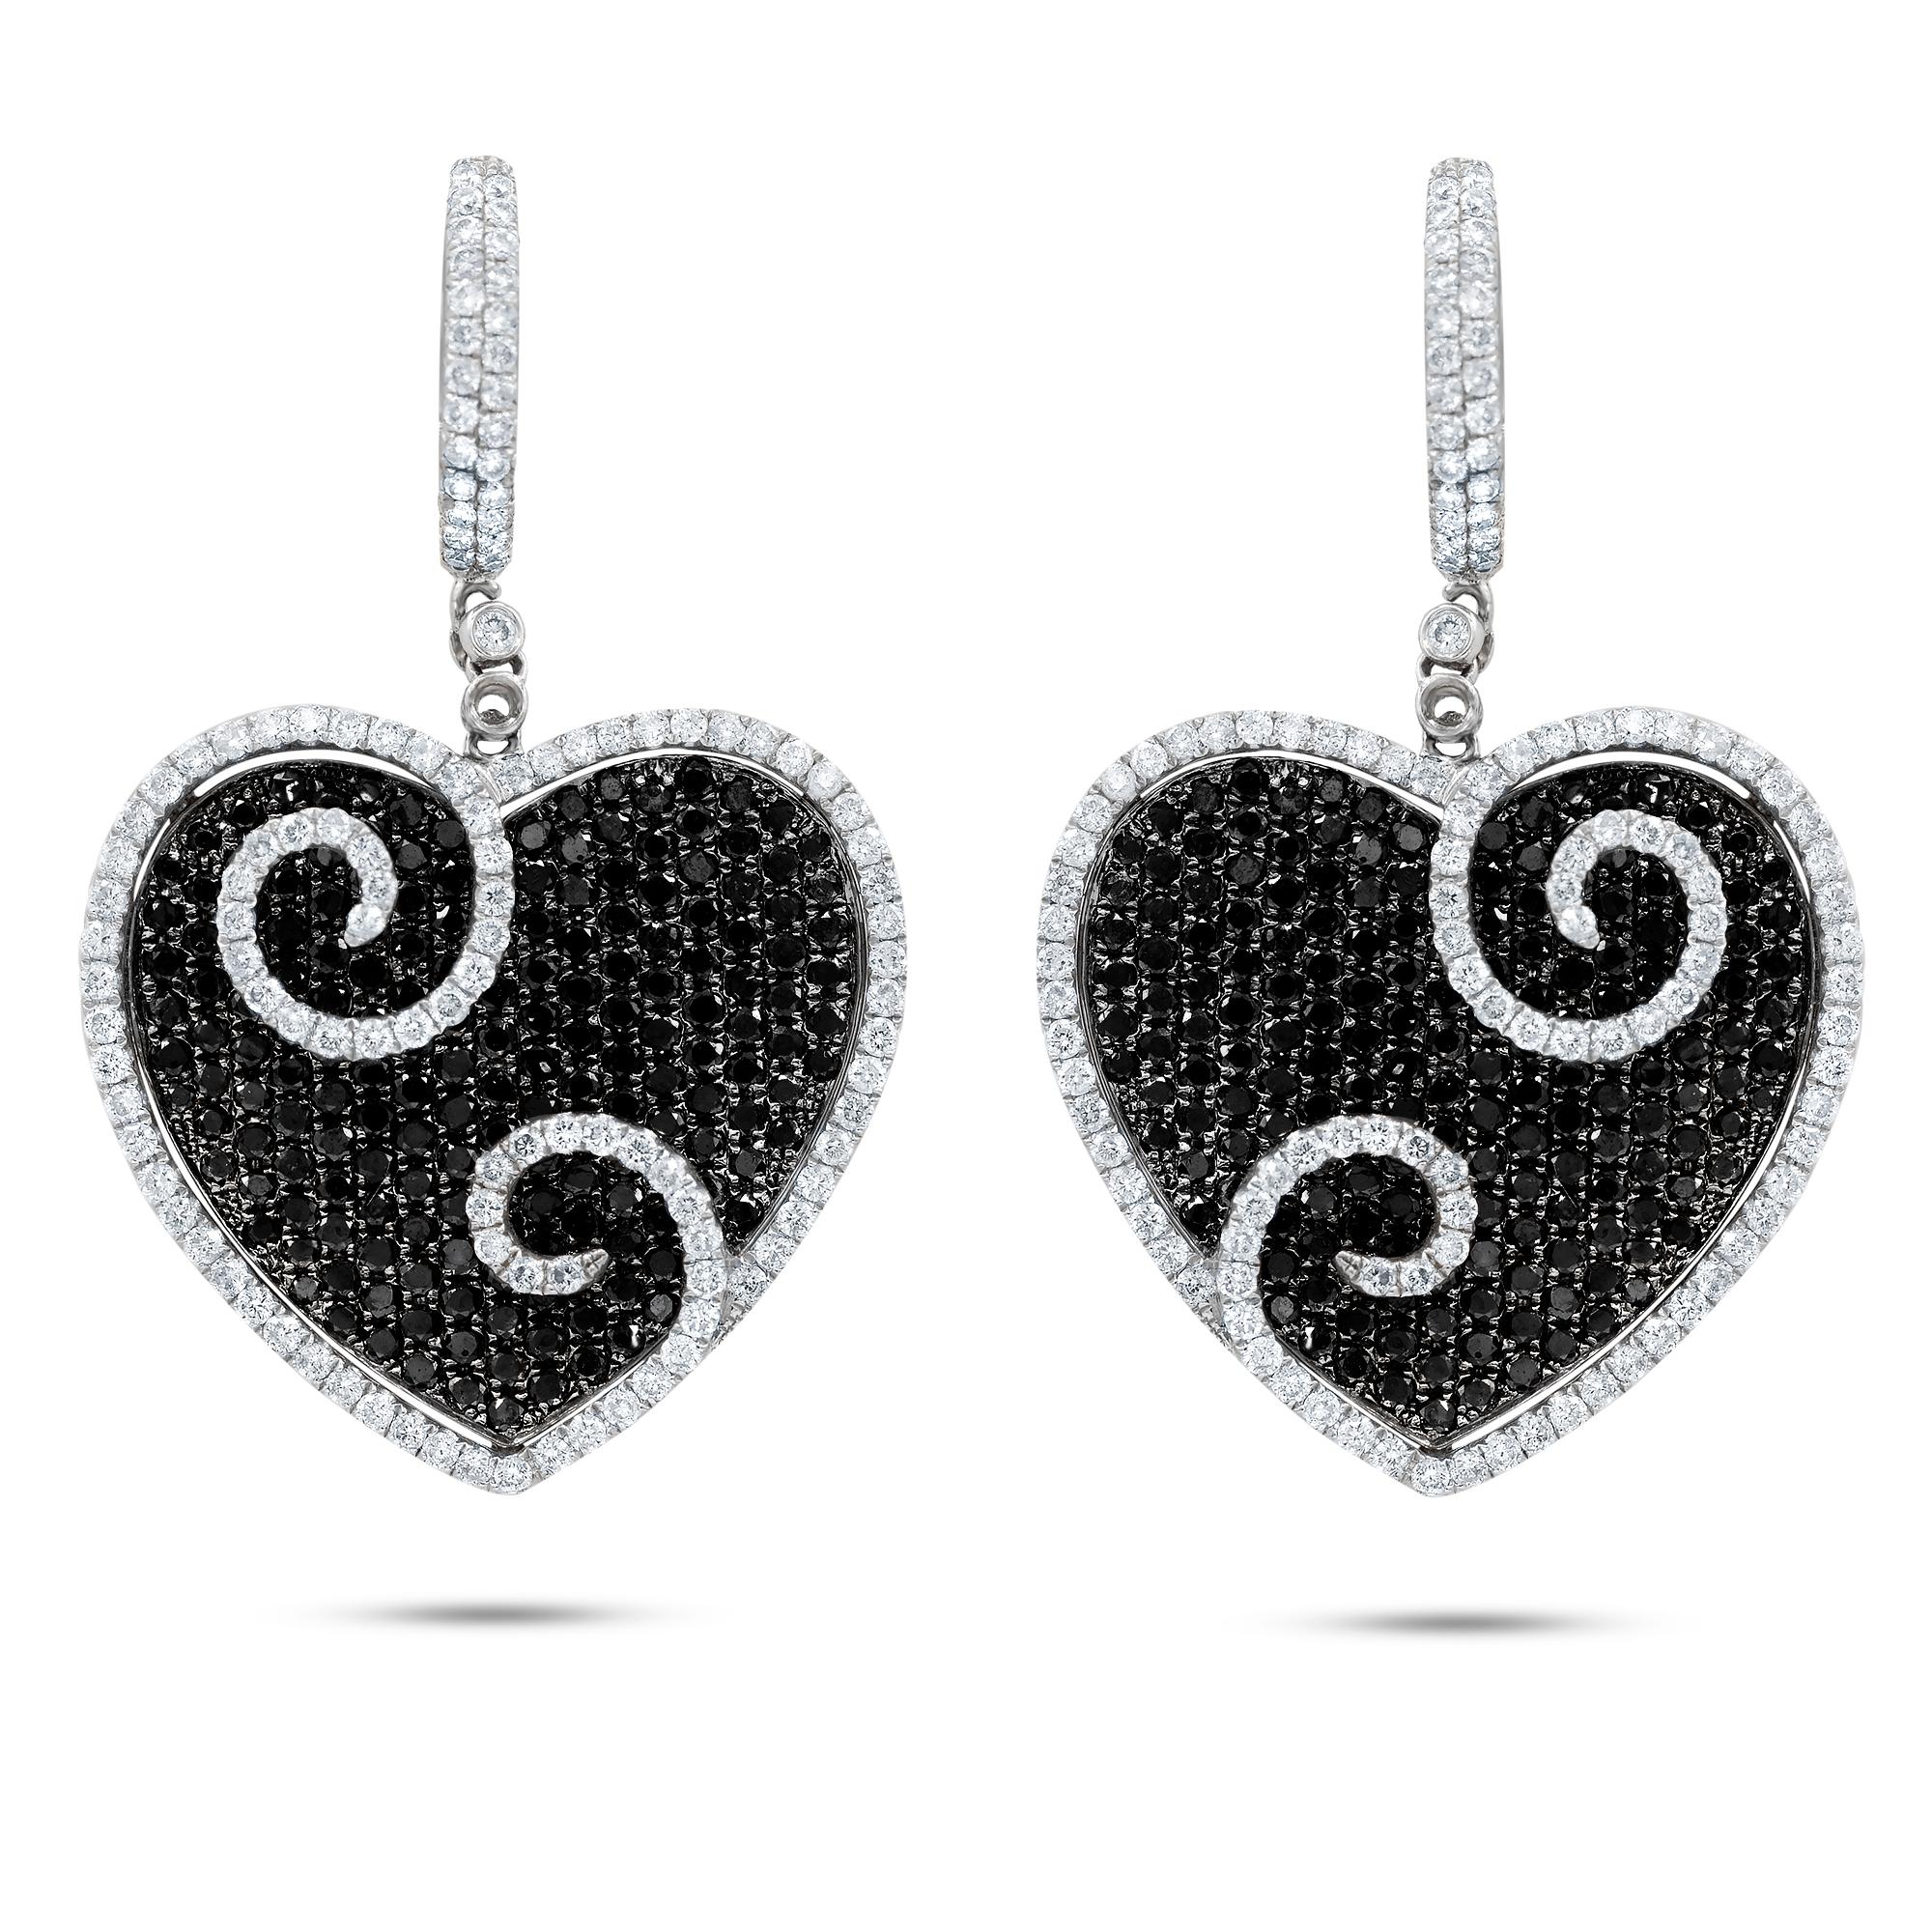 18 kt white gold diamond heart earrings containing 5.23 cts tw of black and white diamonds.
Diana M. is a leading supplier of top-quality fine jewelry for over 35 years.
Diana M is one-stop shop for all your jewelry shopping, carrying line of